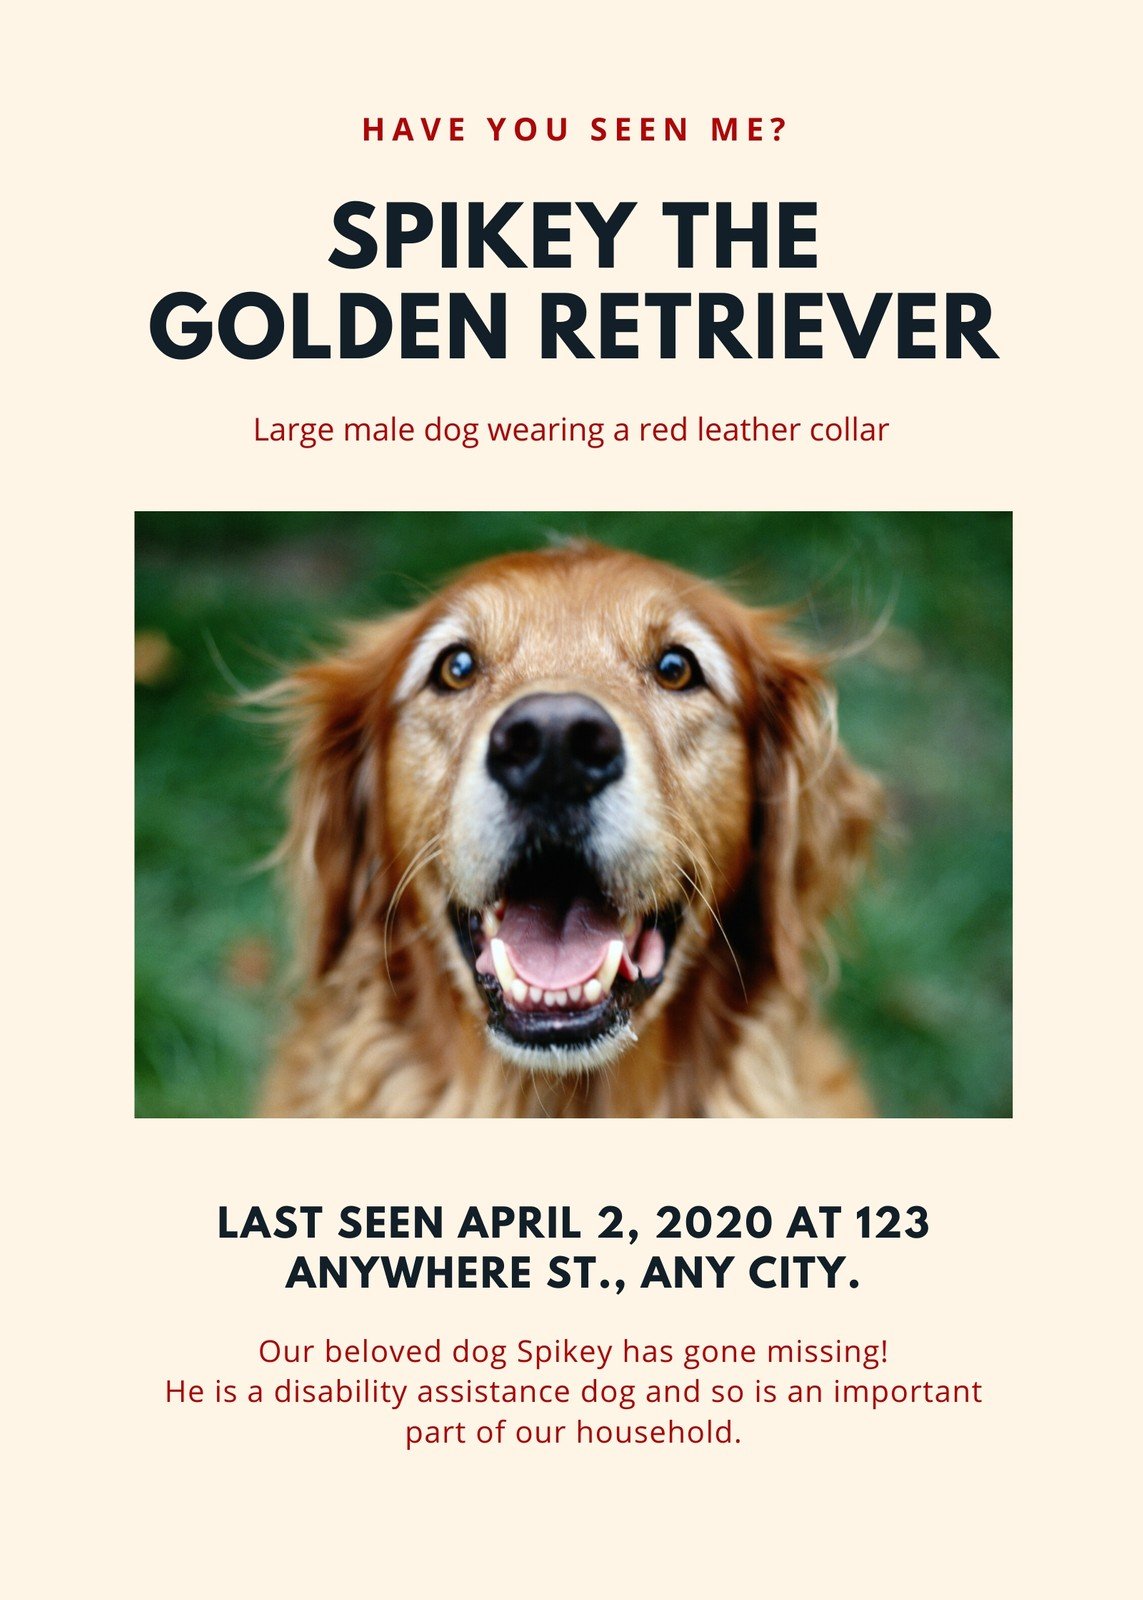 Lost Dog Flyer Template